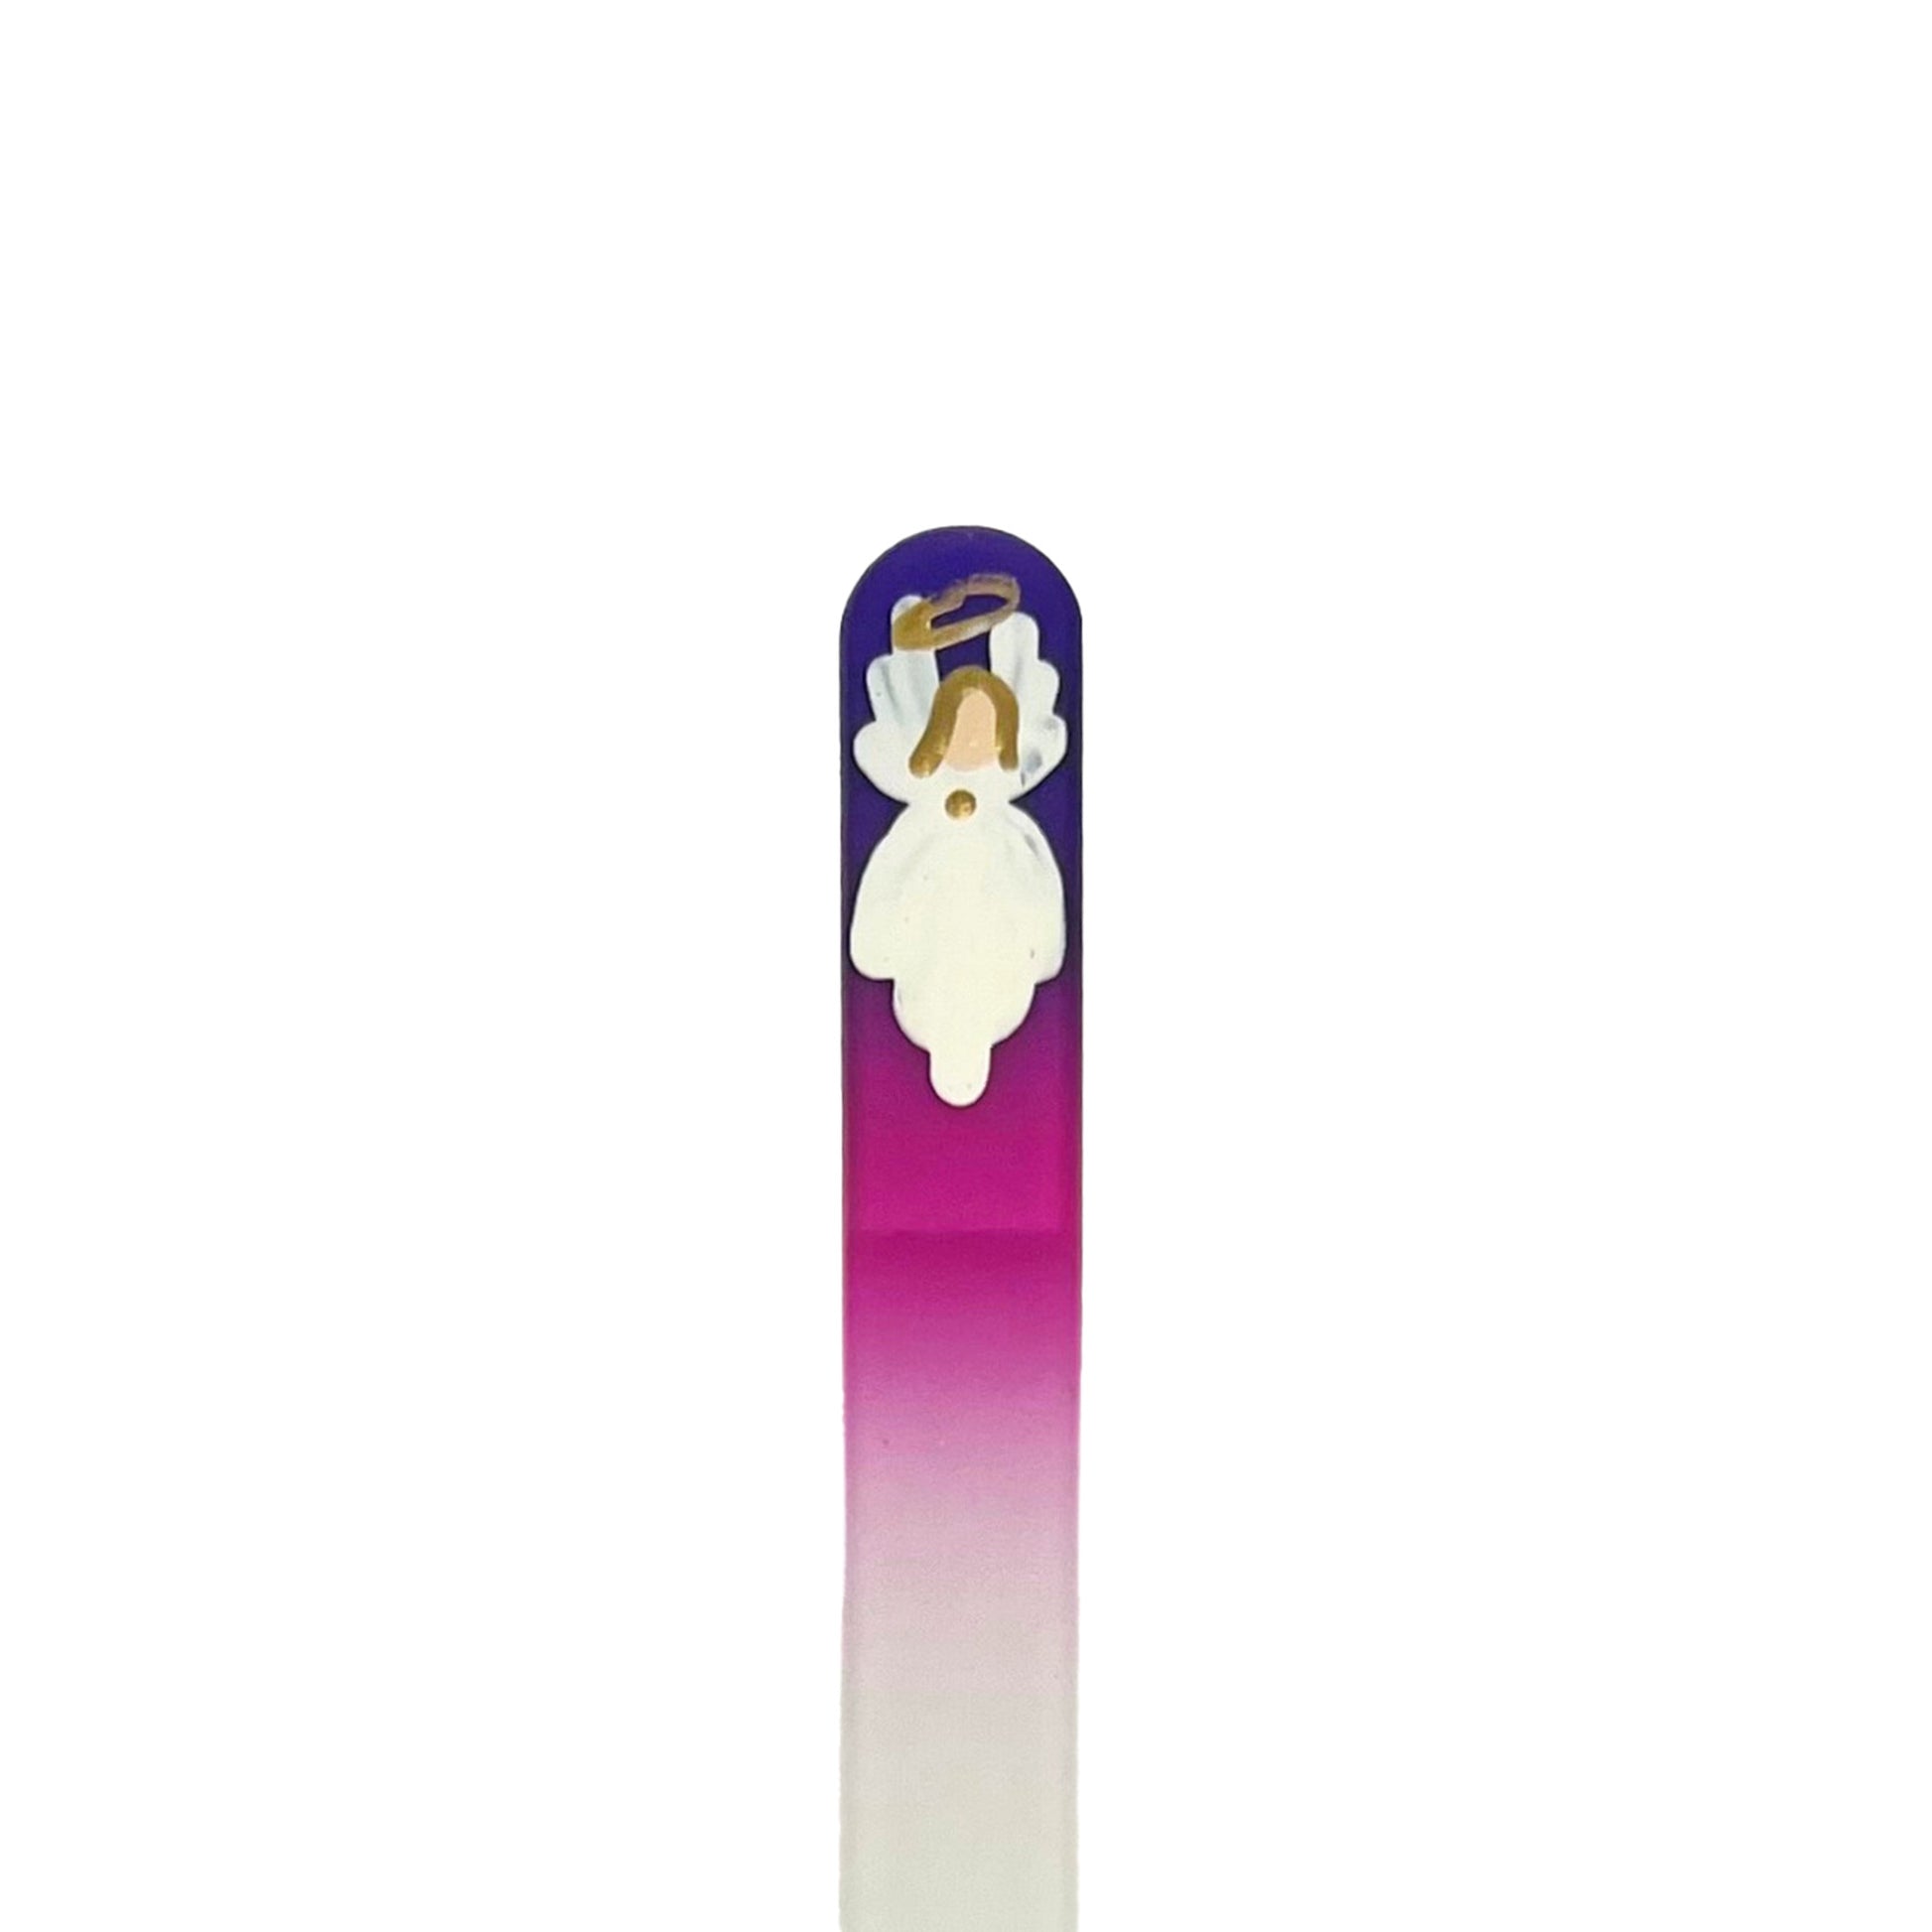 glass nail file with hand painted angel in purple and pink